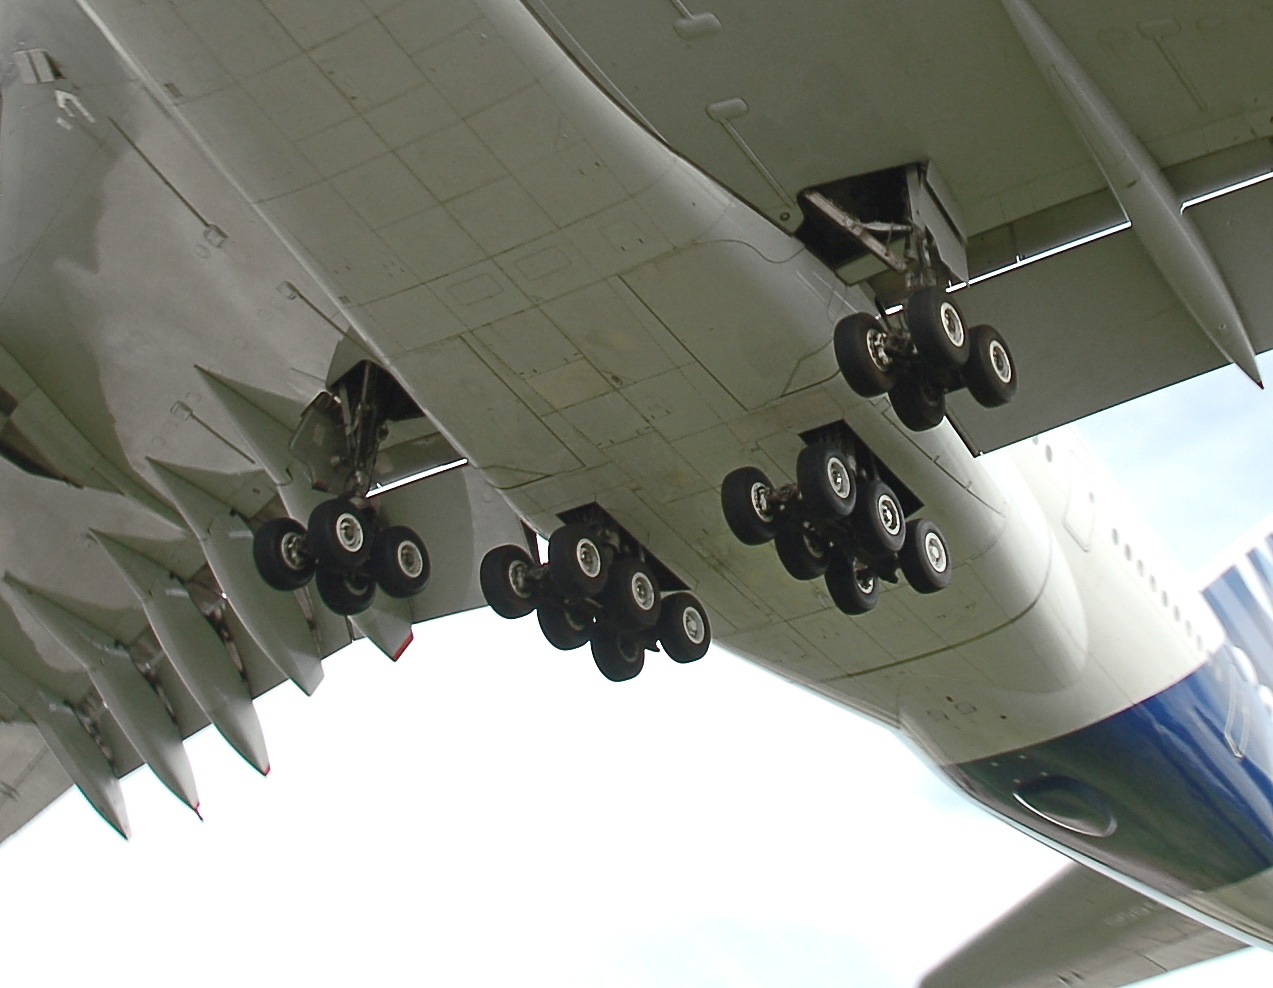 Airbus-owned_A380-800_%28F-WWDD%29_at_Filton_Airfield_%28England%29_in_mid-2010_arp.jpg